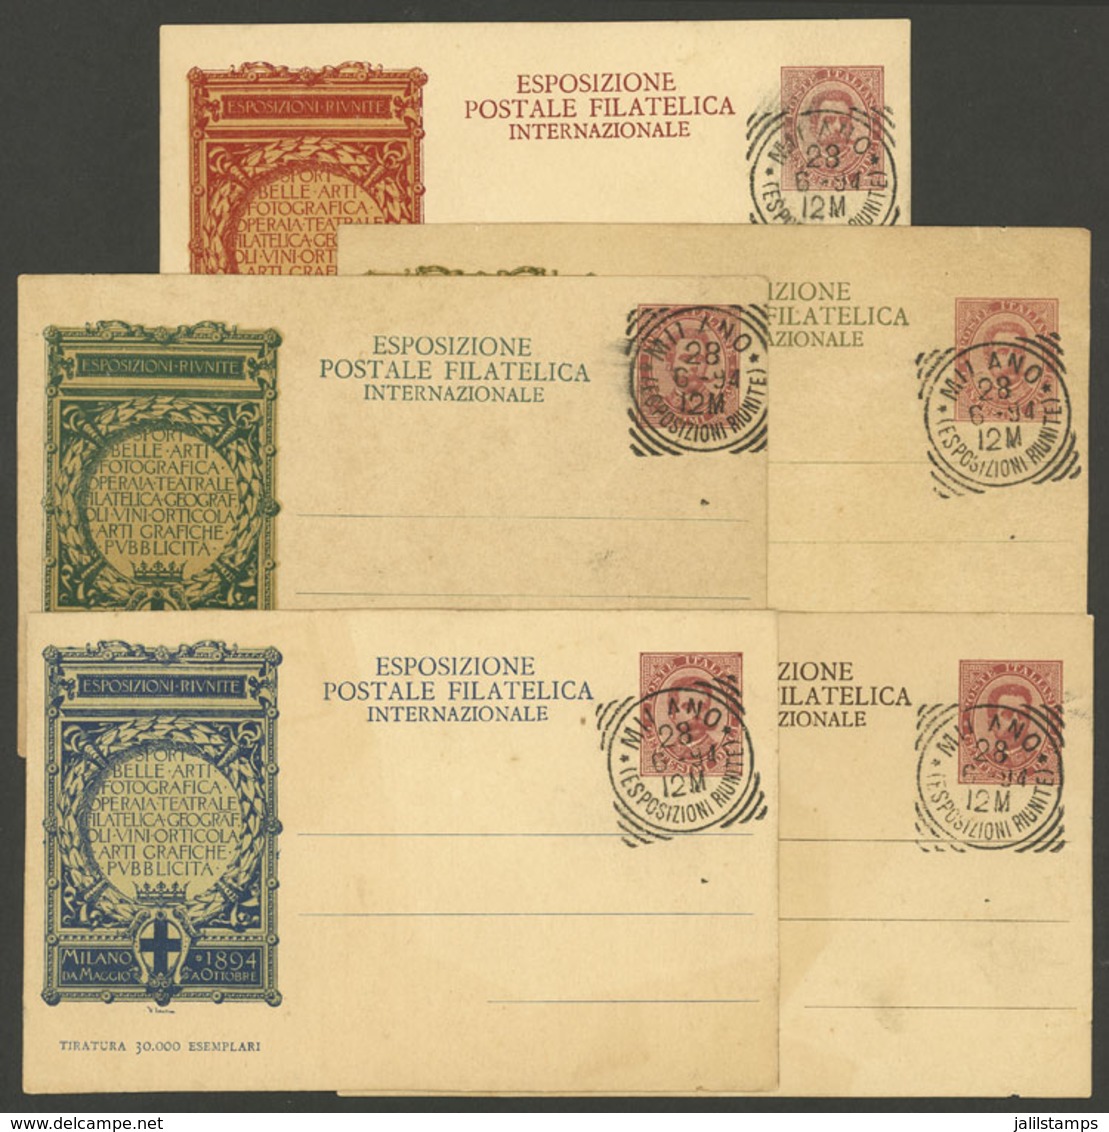 ITALY: 5 Postal Cards Of The 1894 Milano Intl. Exhibition, With Special Postmark Of The Expo Of 28/JUN, Very Nice! - Non Classés